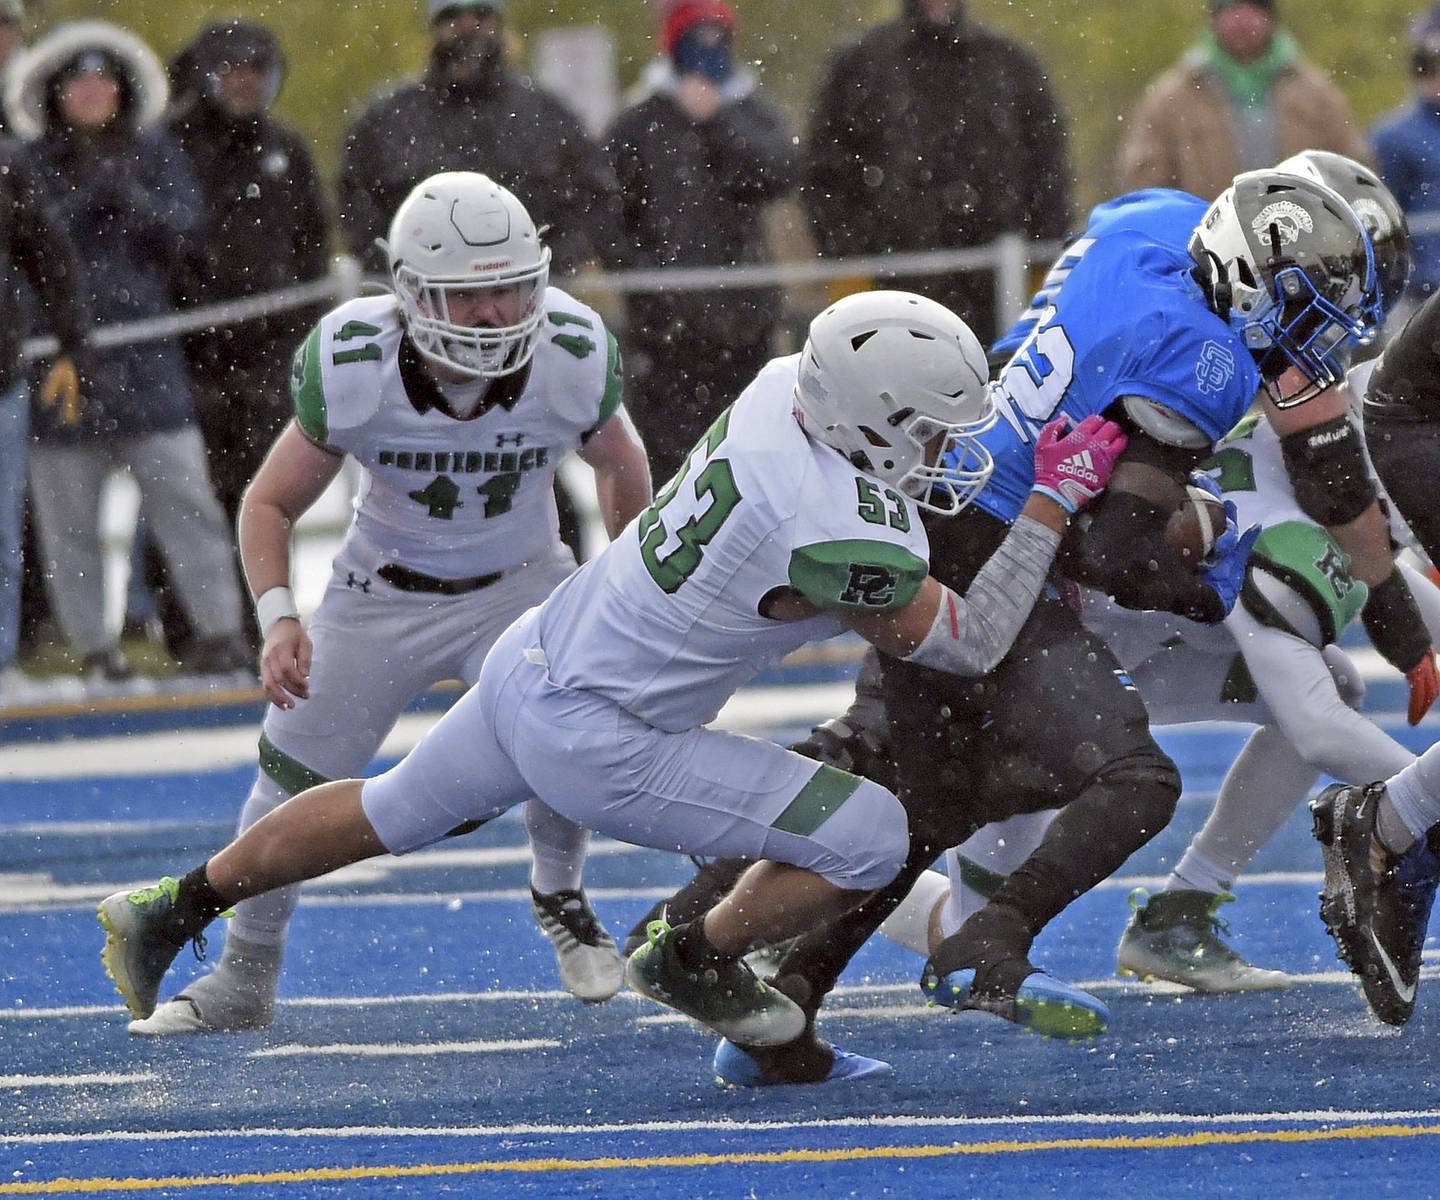 Providence's Byron Olson chases down Wheaton St. Francis' Amari Head for a tackle at the line of scrimmage during a Class 4A state semifinal game in Wheaton on Saturday, Nov. 19, 2022.